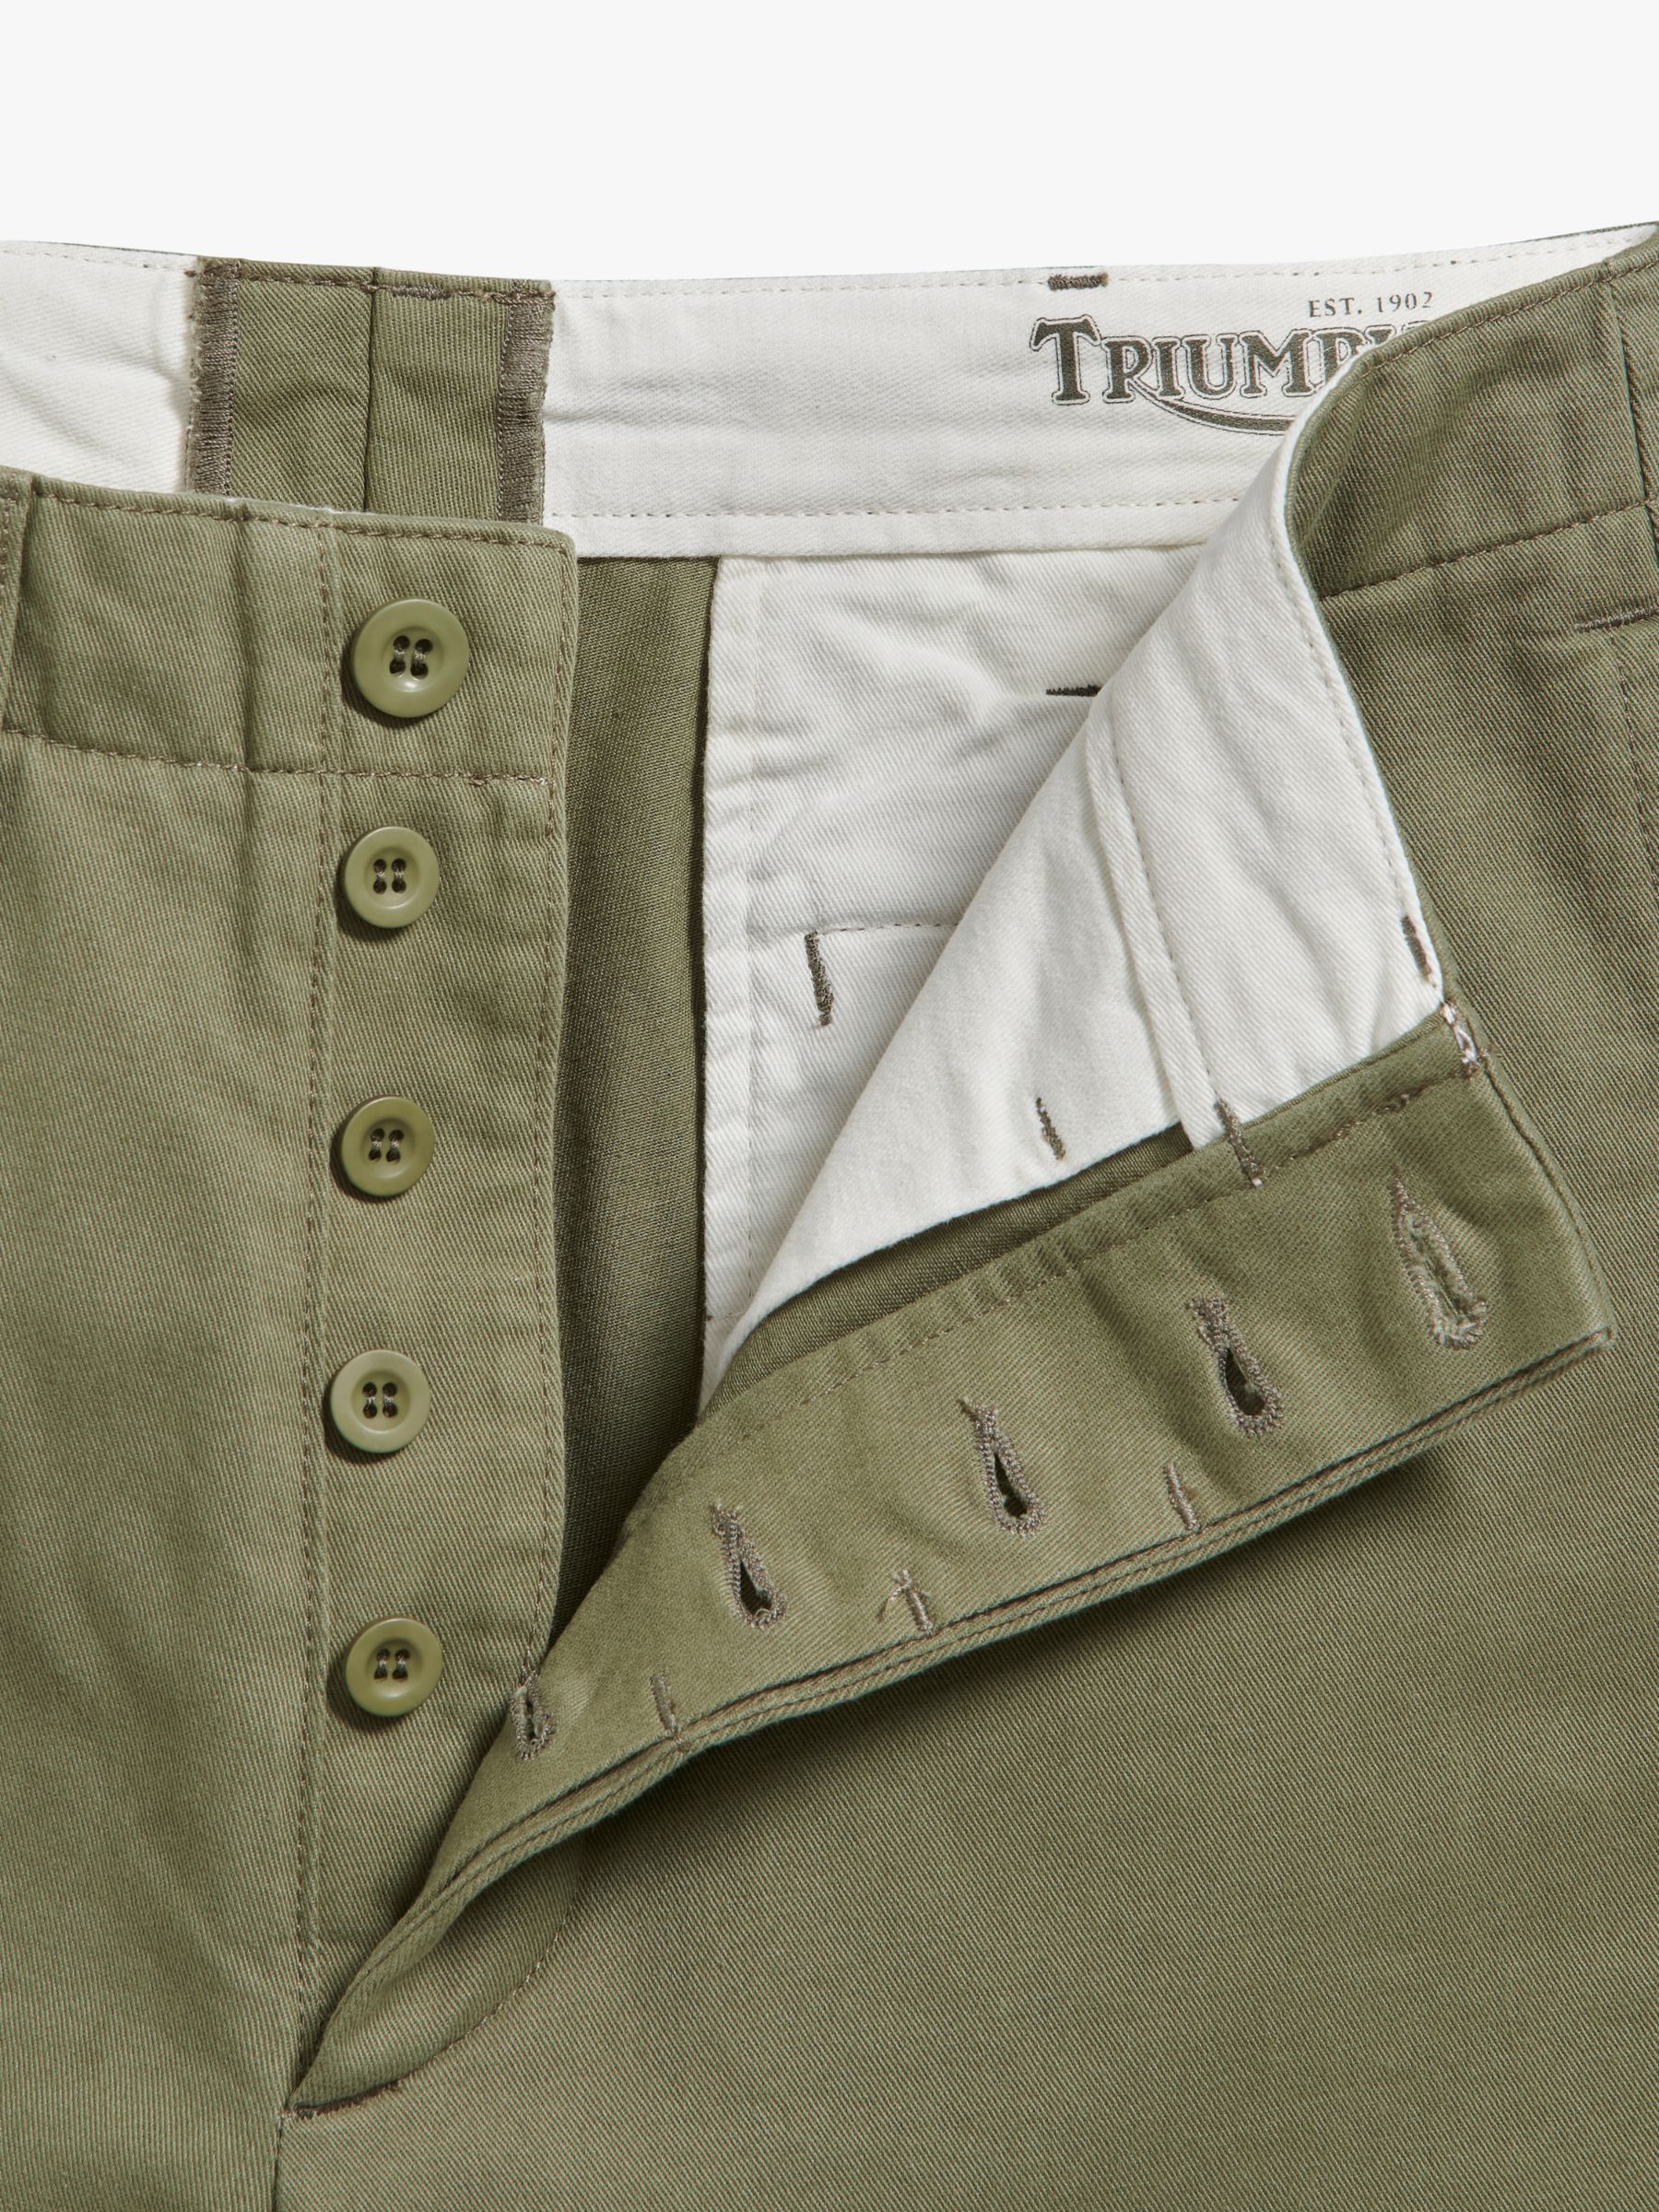 Triumph Motorcycles Officer Chinos, Olive, W38/L34